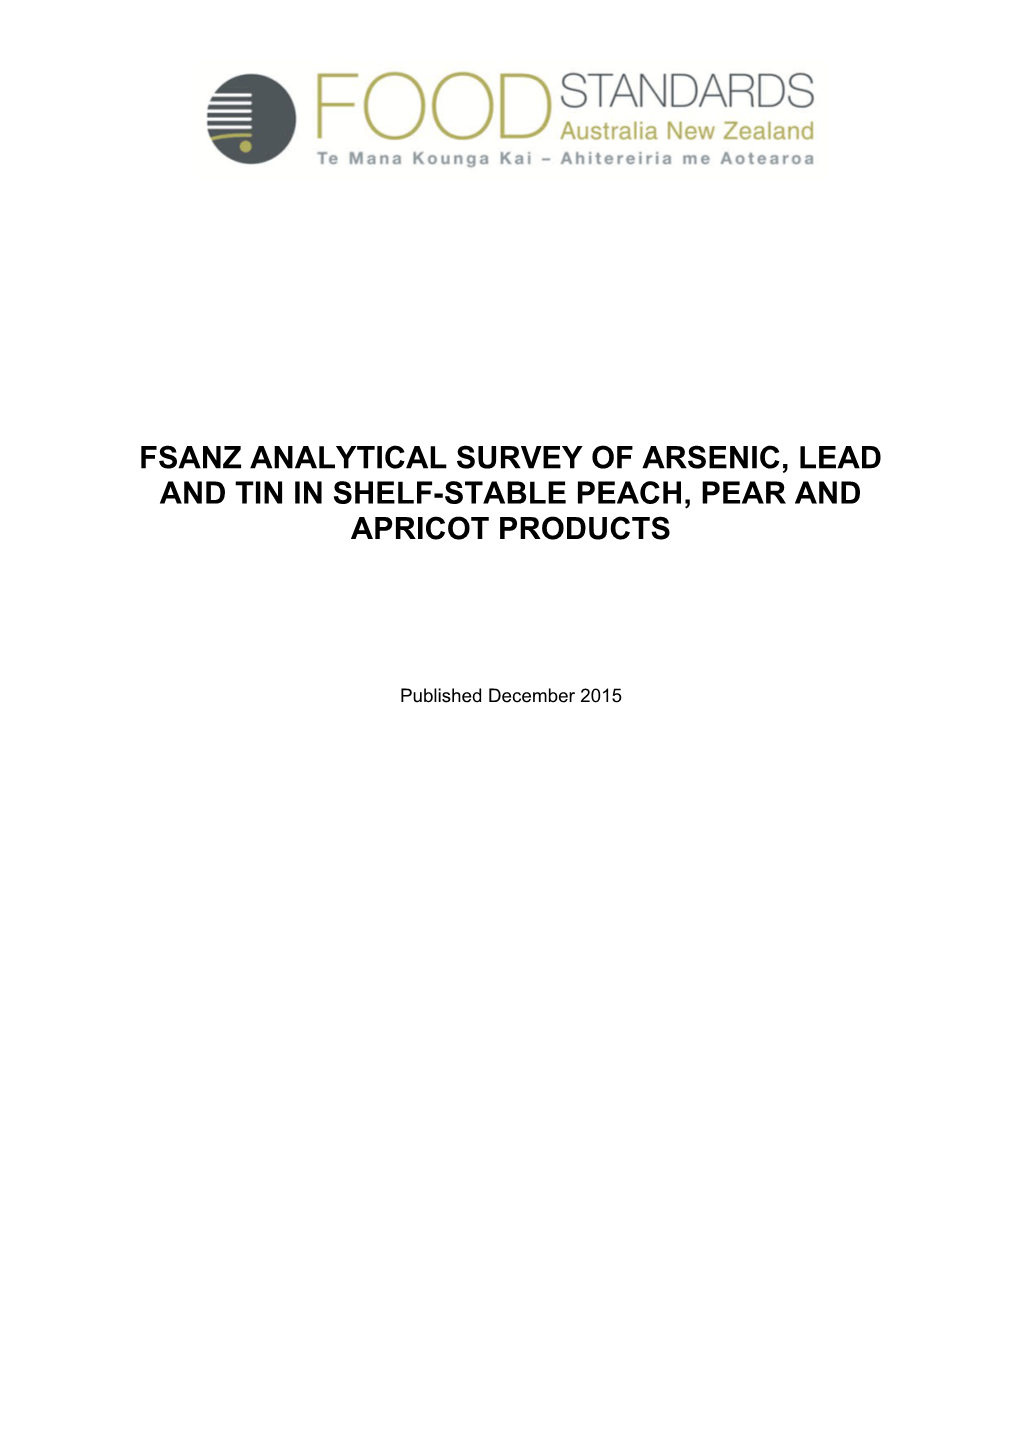 Fsanz Analytical Survey of Arsenic, Lead and Tin in Shelf-Stable Peach, Pear and Apricot